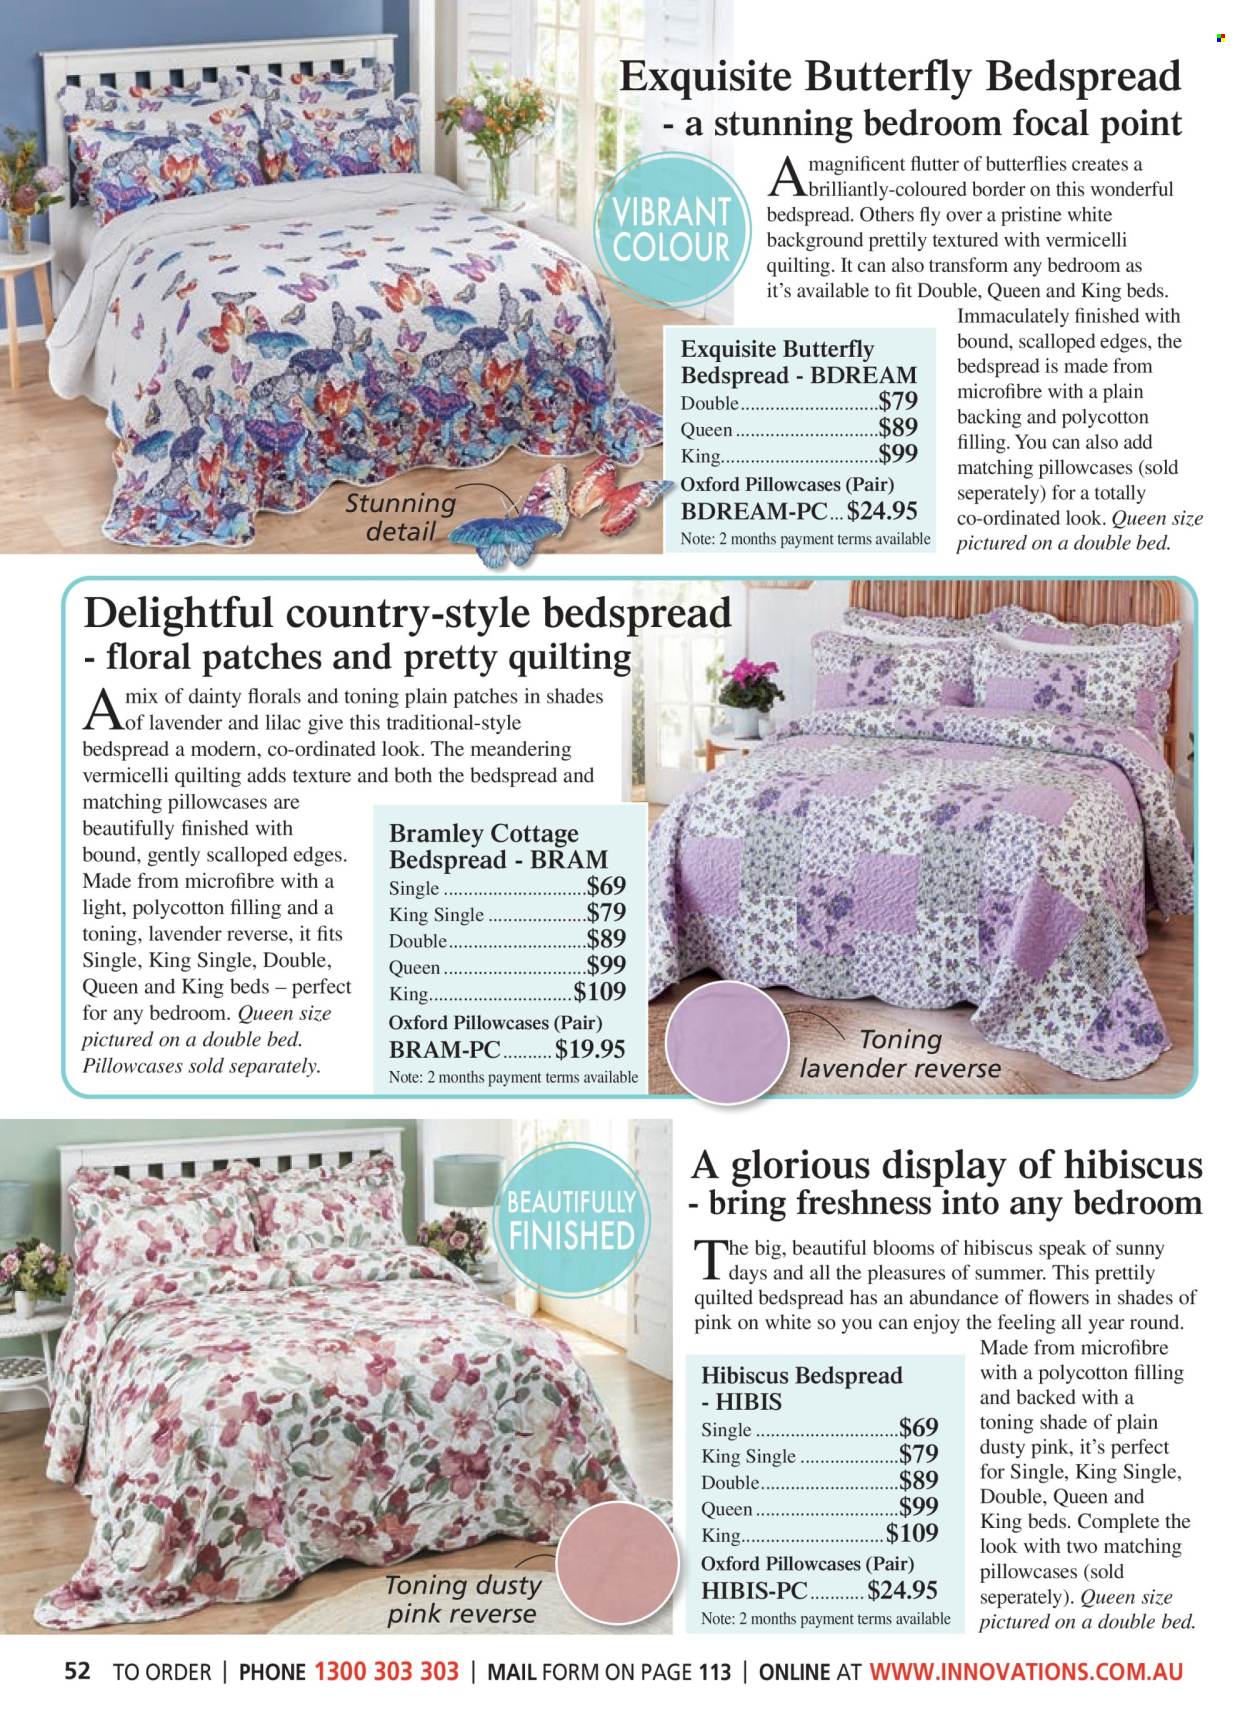 thumbnail - Innovations Catalogue - Sales products - bedspread, pillowcase. Page 52.